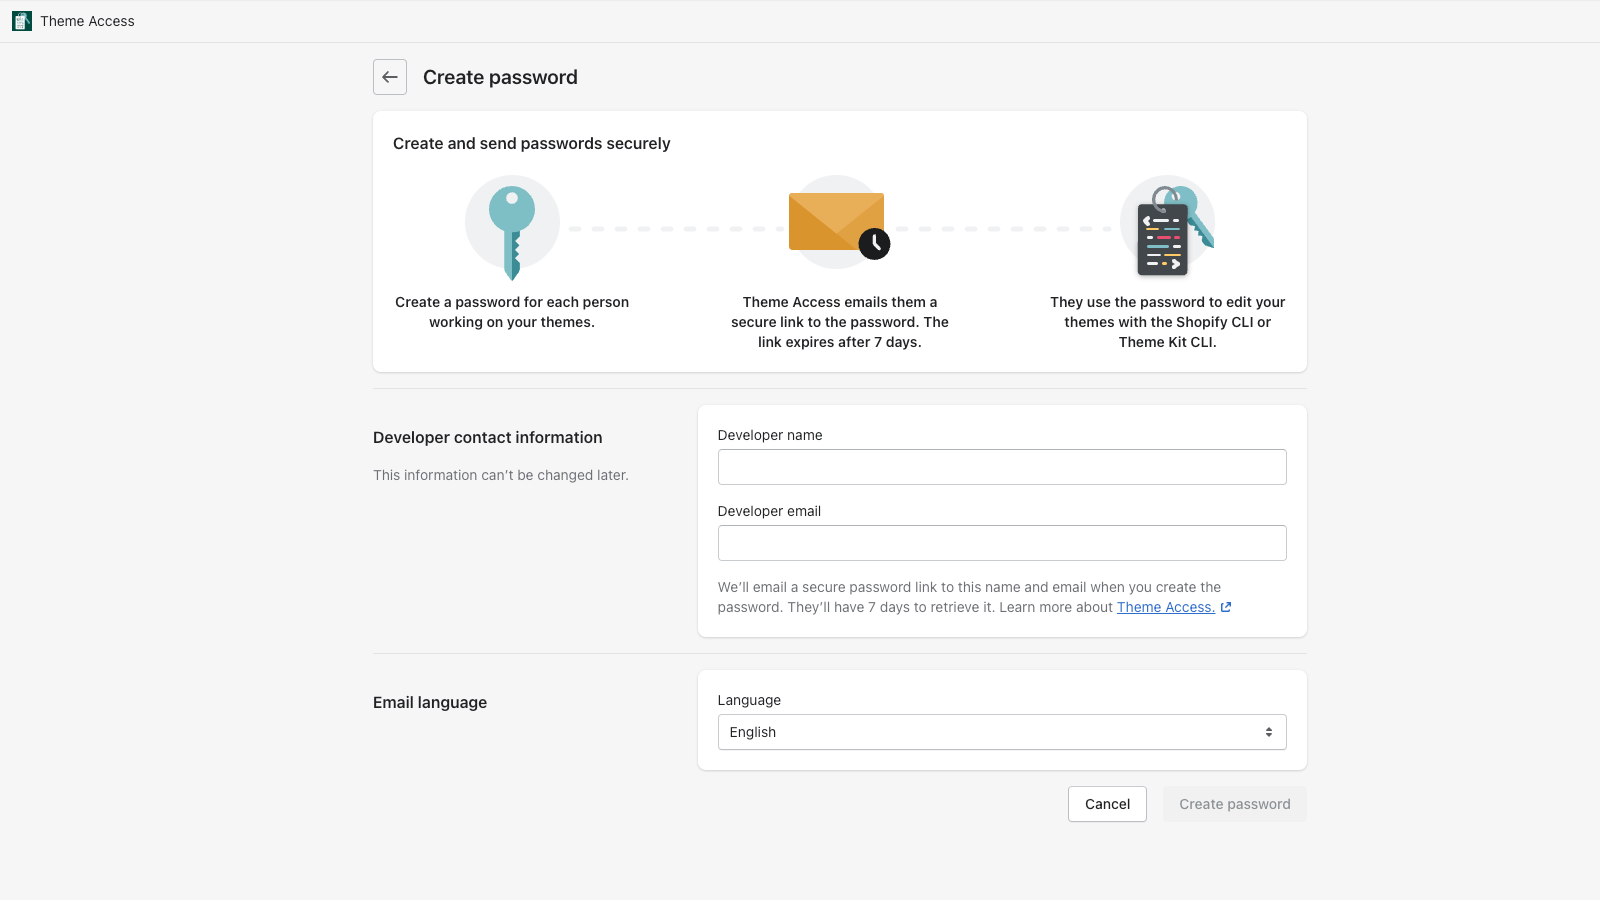 Create and send passwords to developer partners